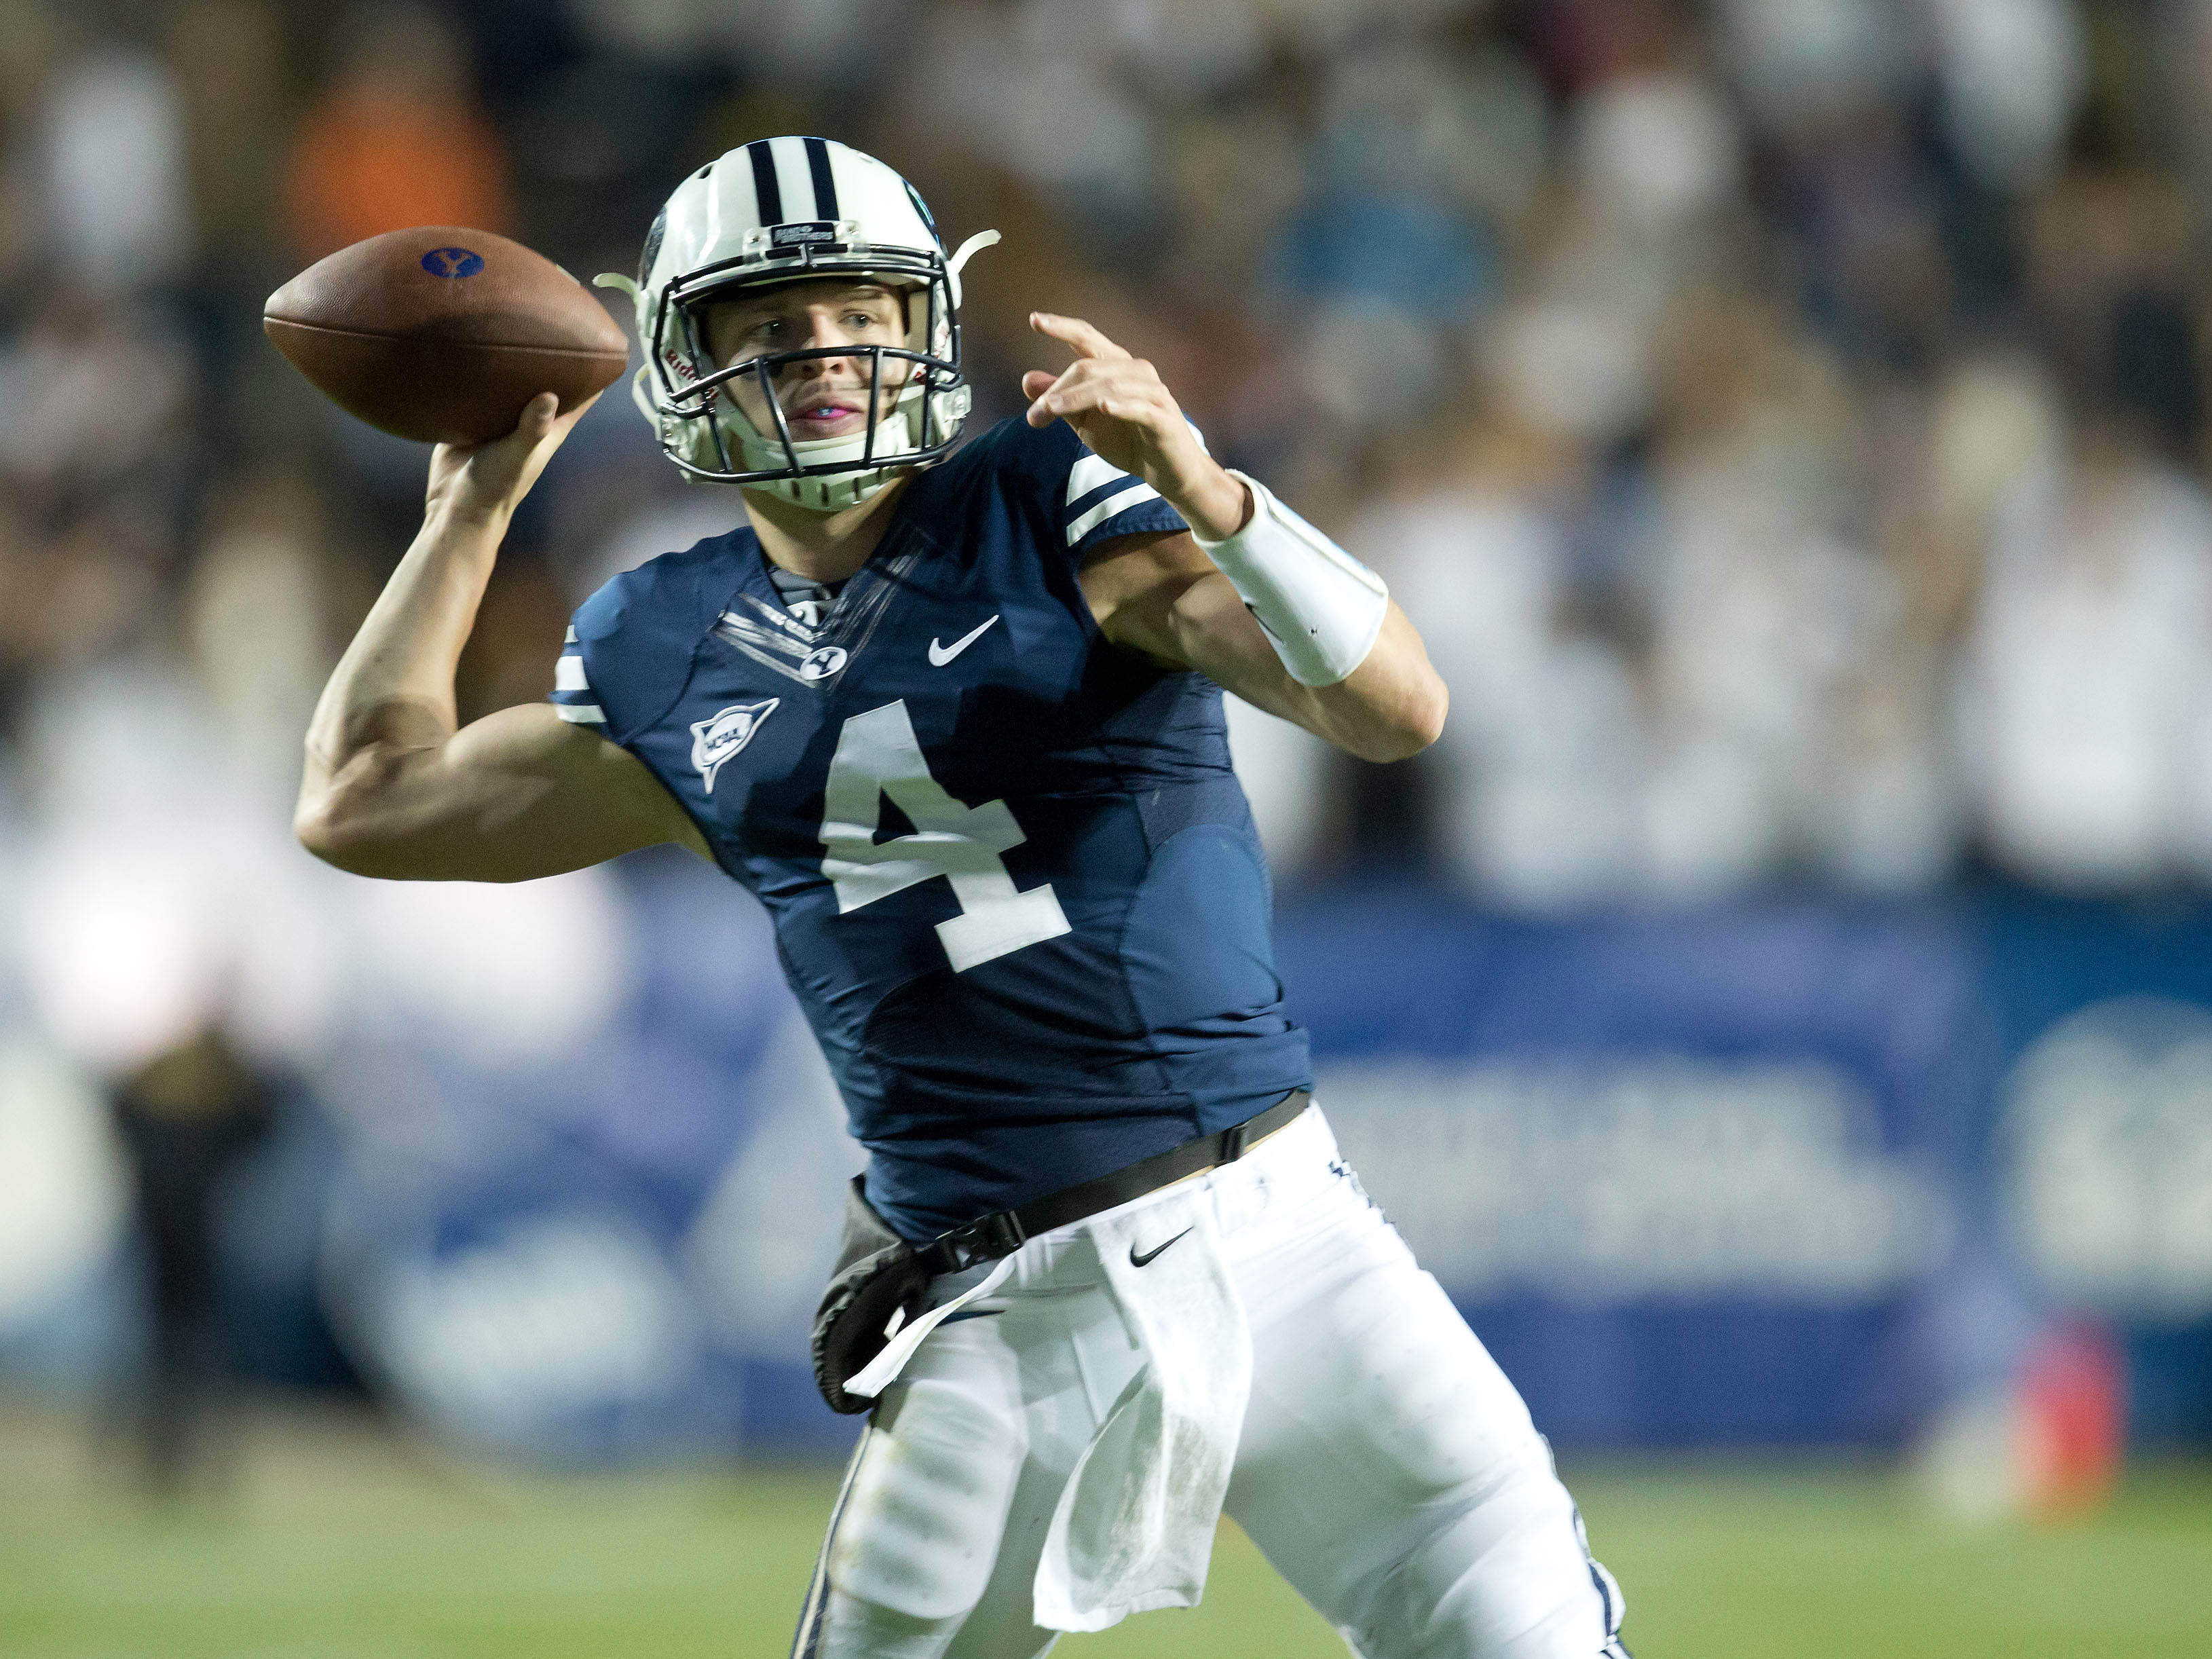 Houston Cougars at BYU Cougars: Betting odds, point spread and tv info